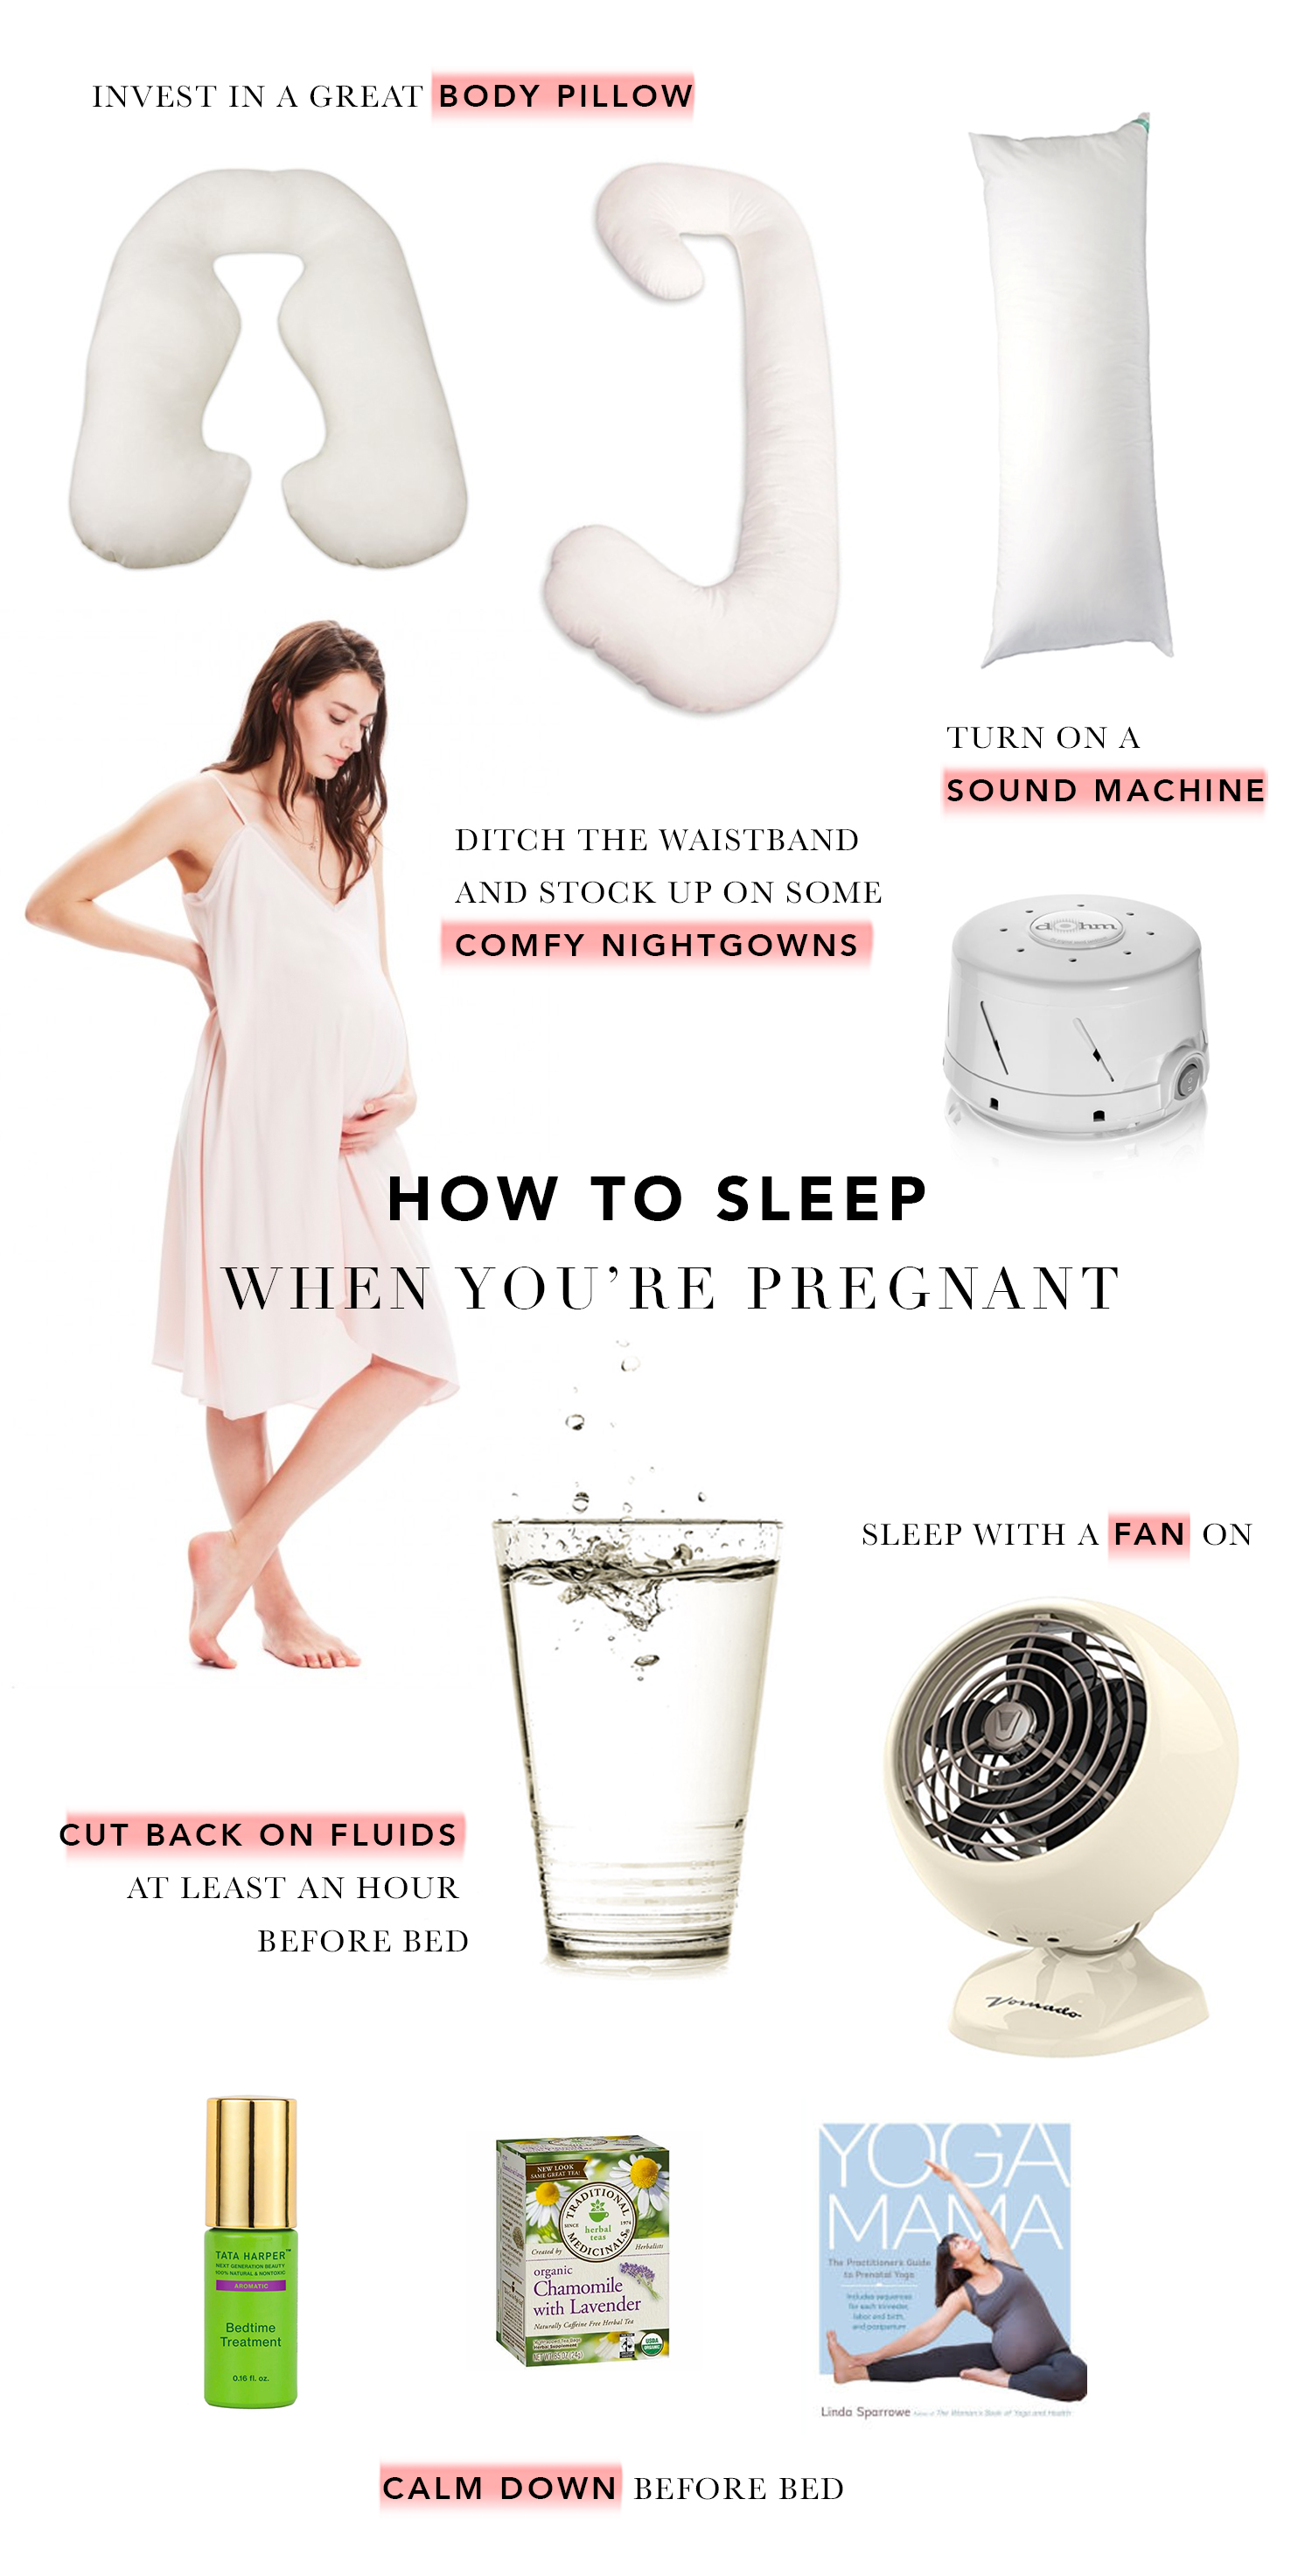 How to Sleep Better While Pregnant (9 Tips) - MomLovesBest